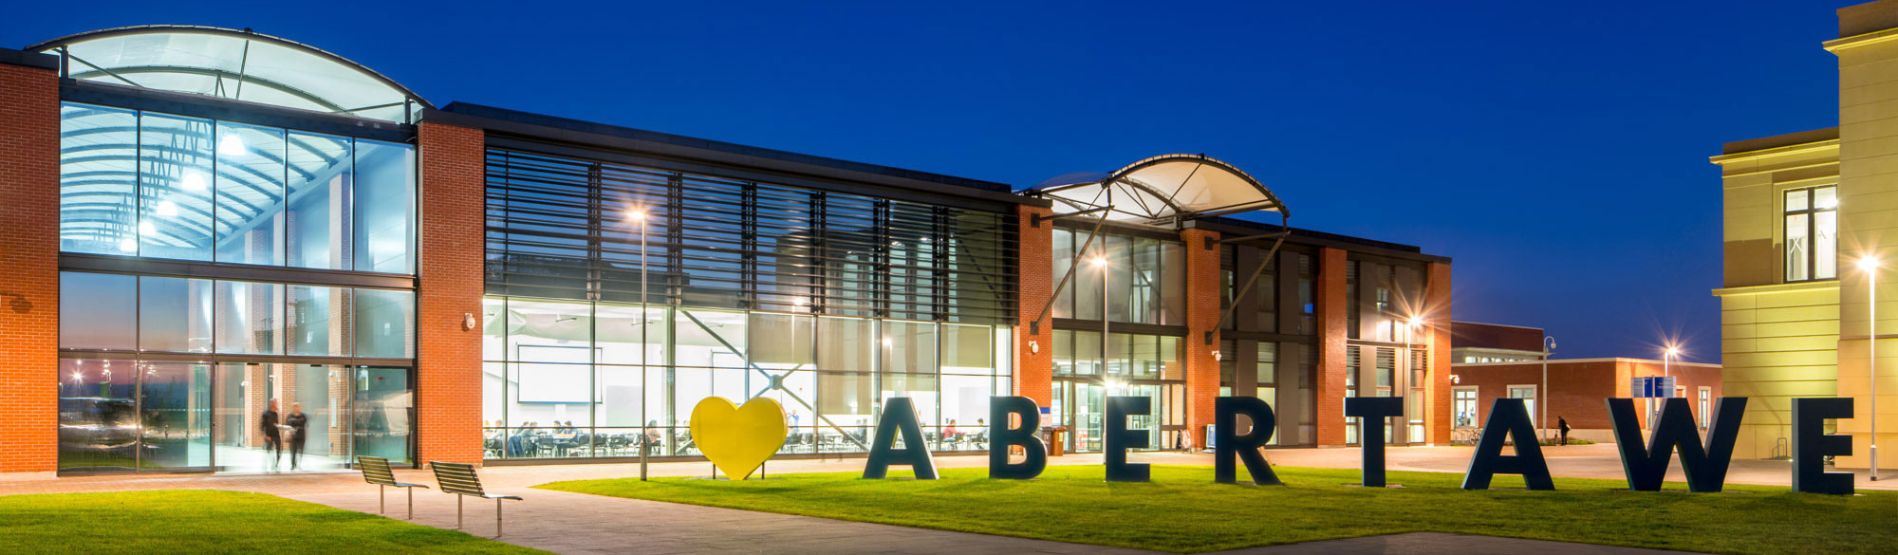 Engineering building at night, with giant letters 'Heart - Abertawe' in the foreground.